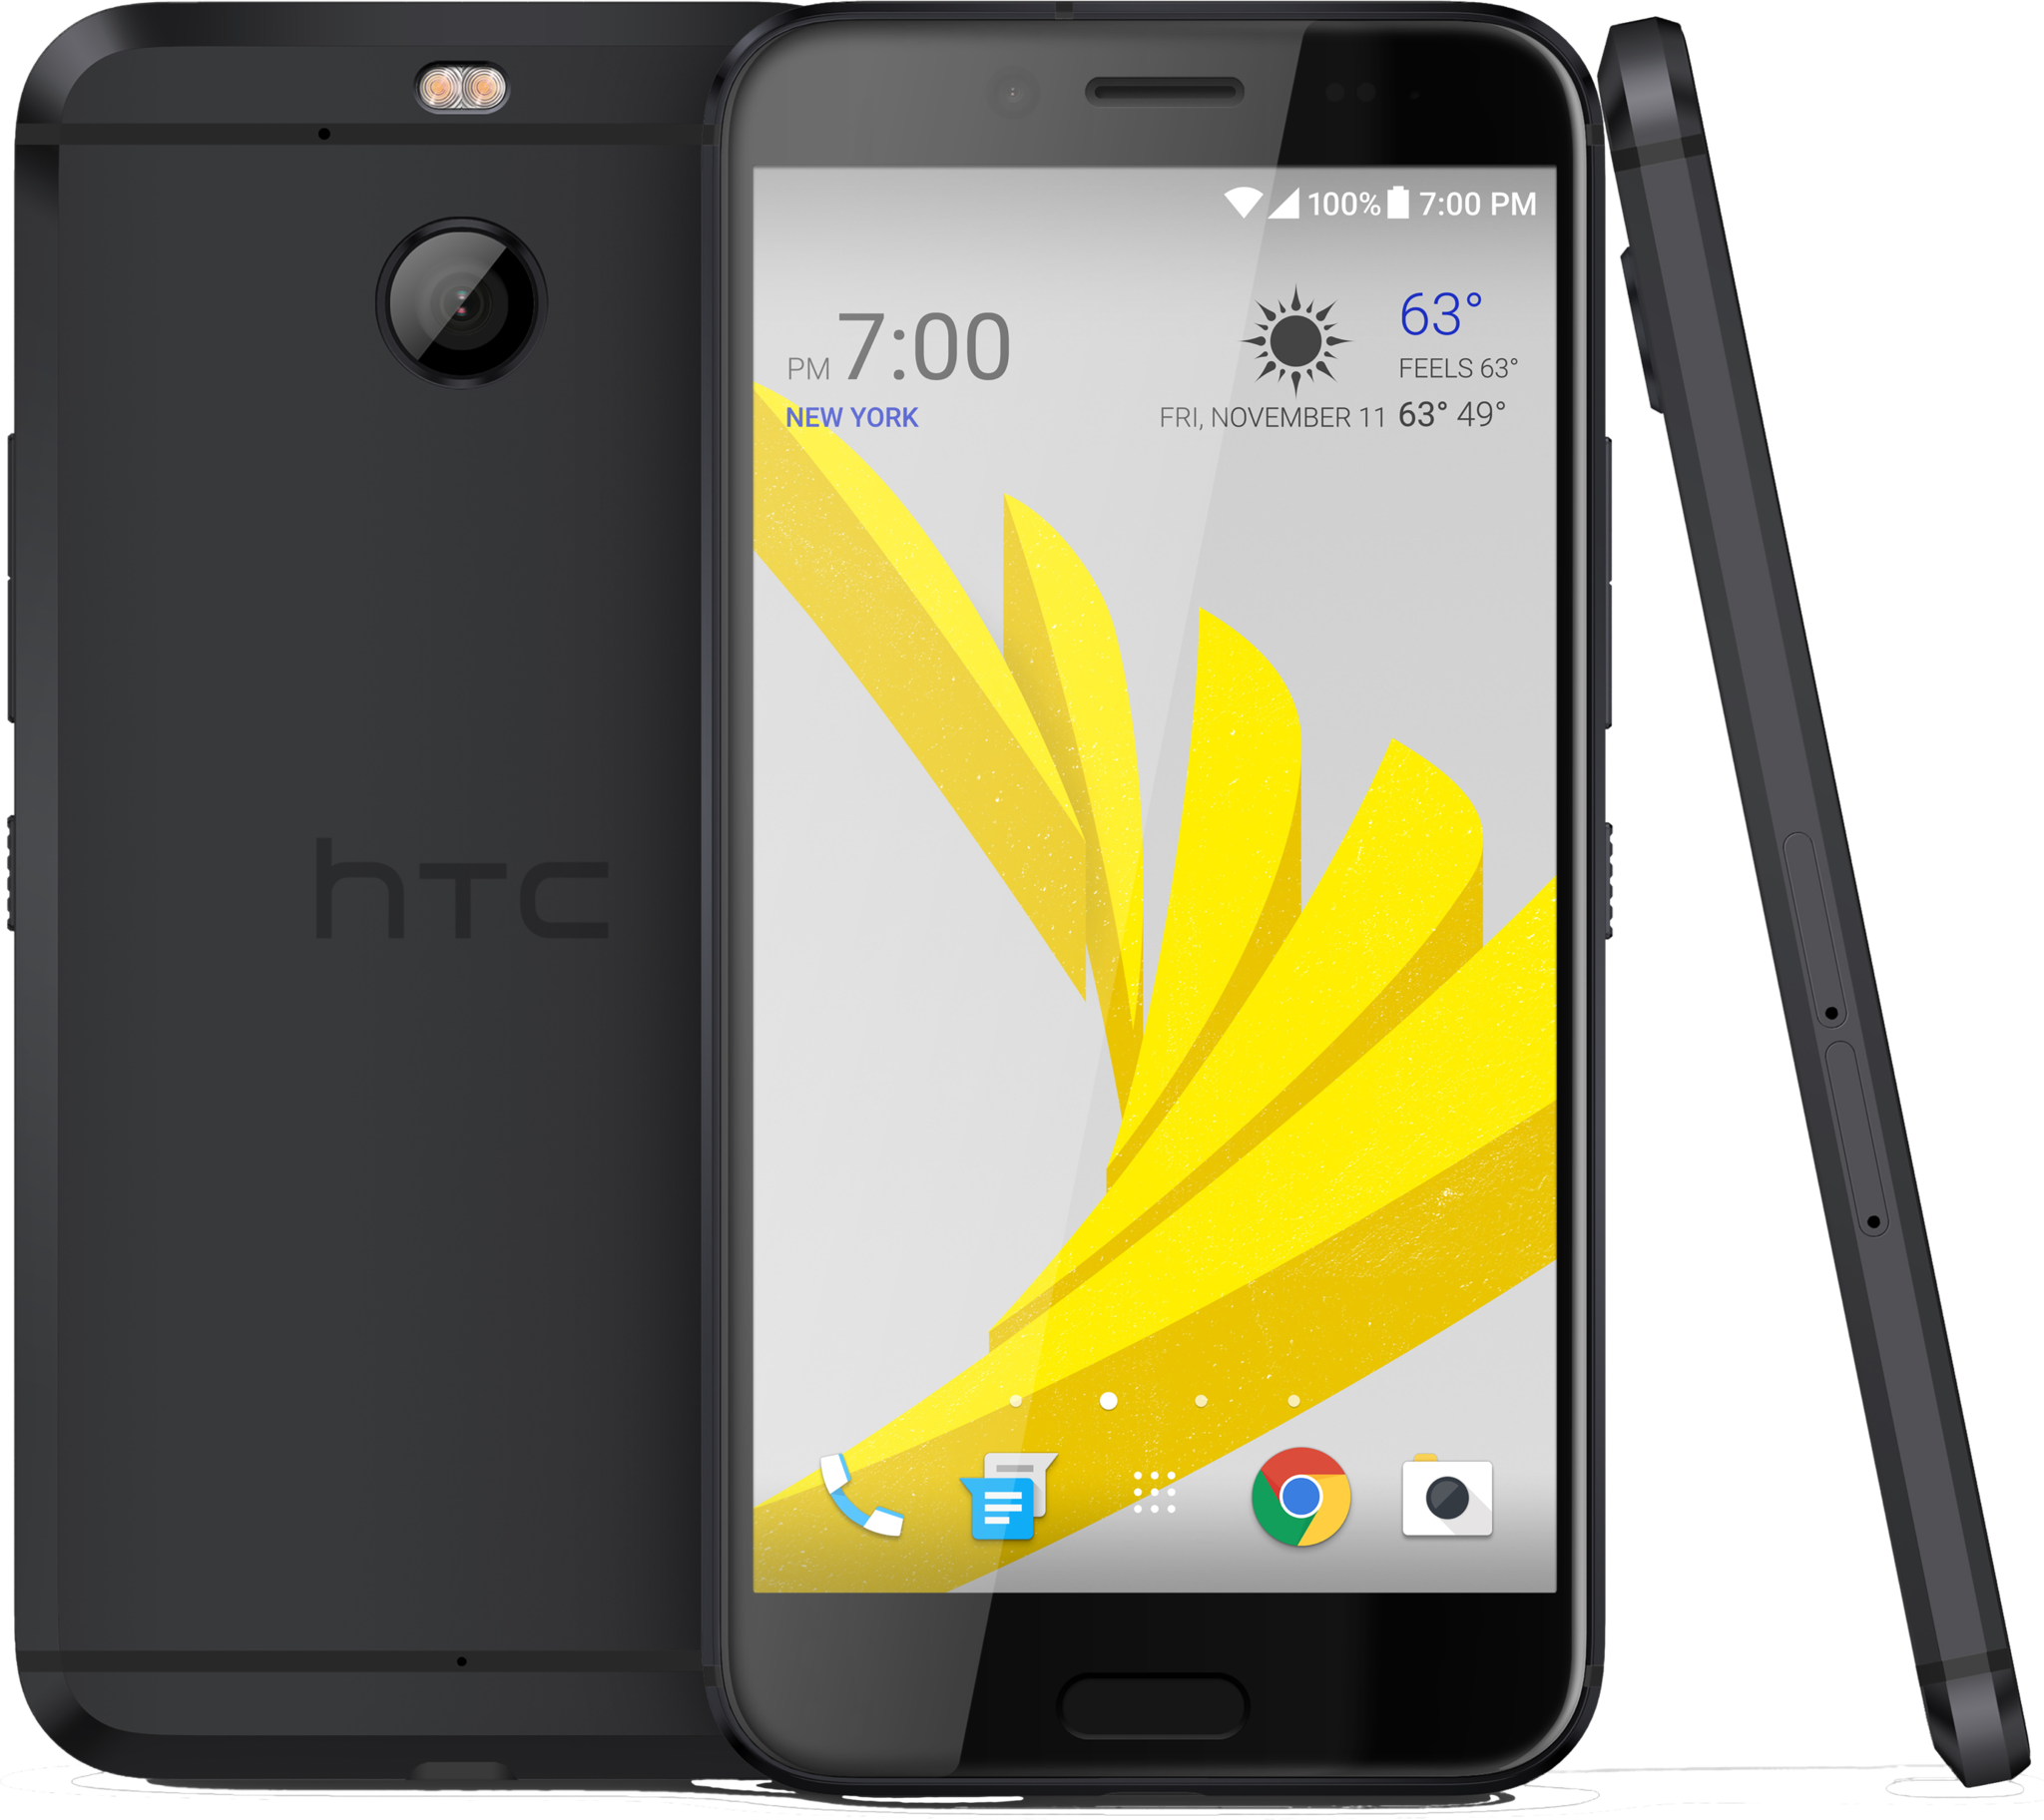 H T C Smartphone Frontand Side View